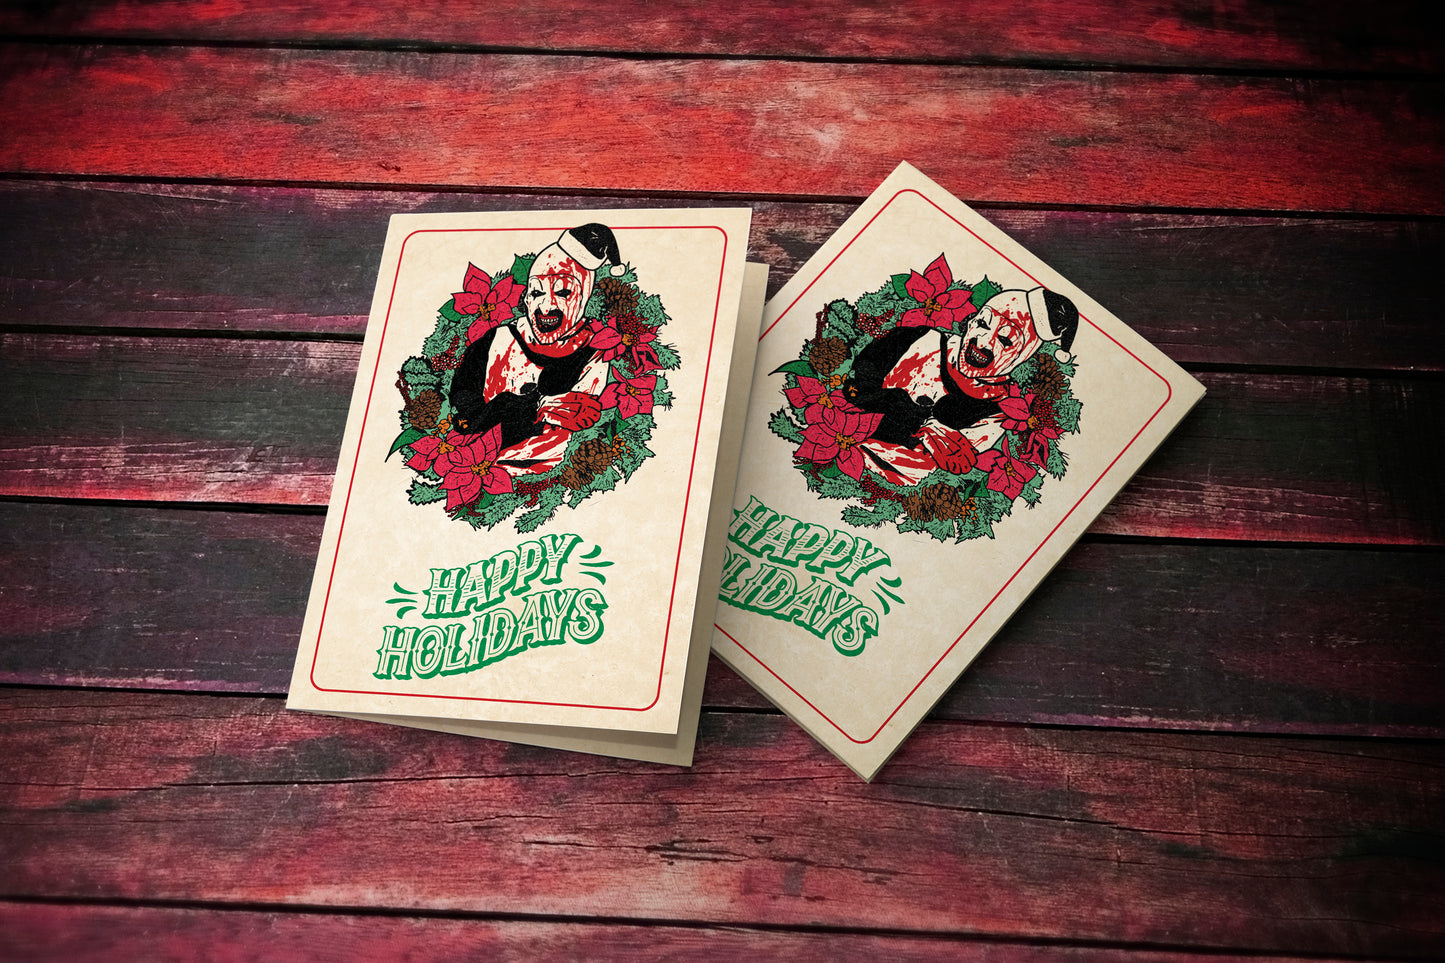 Art The Clown Happy Holiday Greeting Card (Officially Licensed)